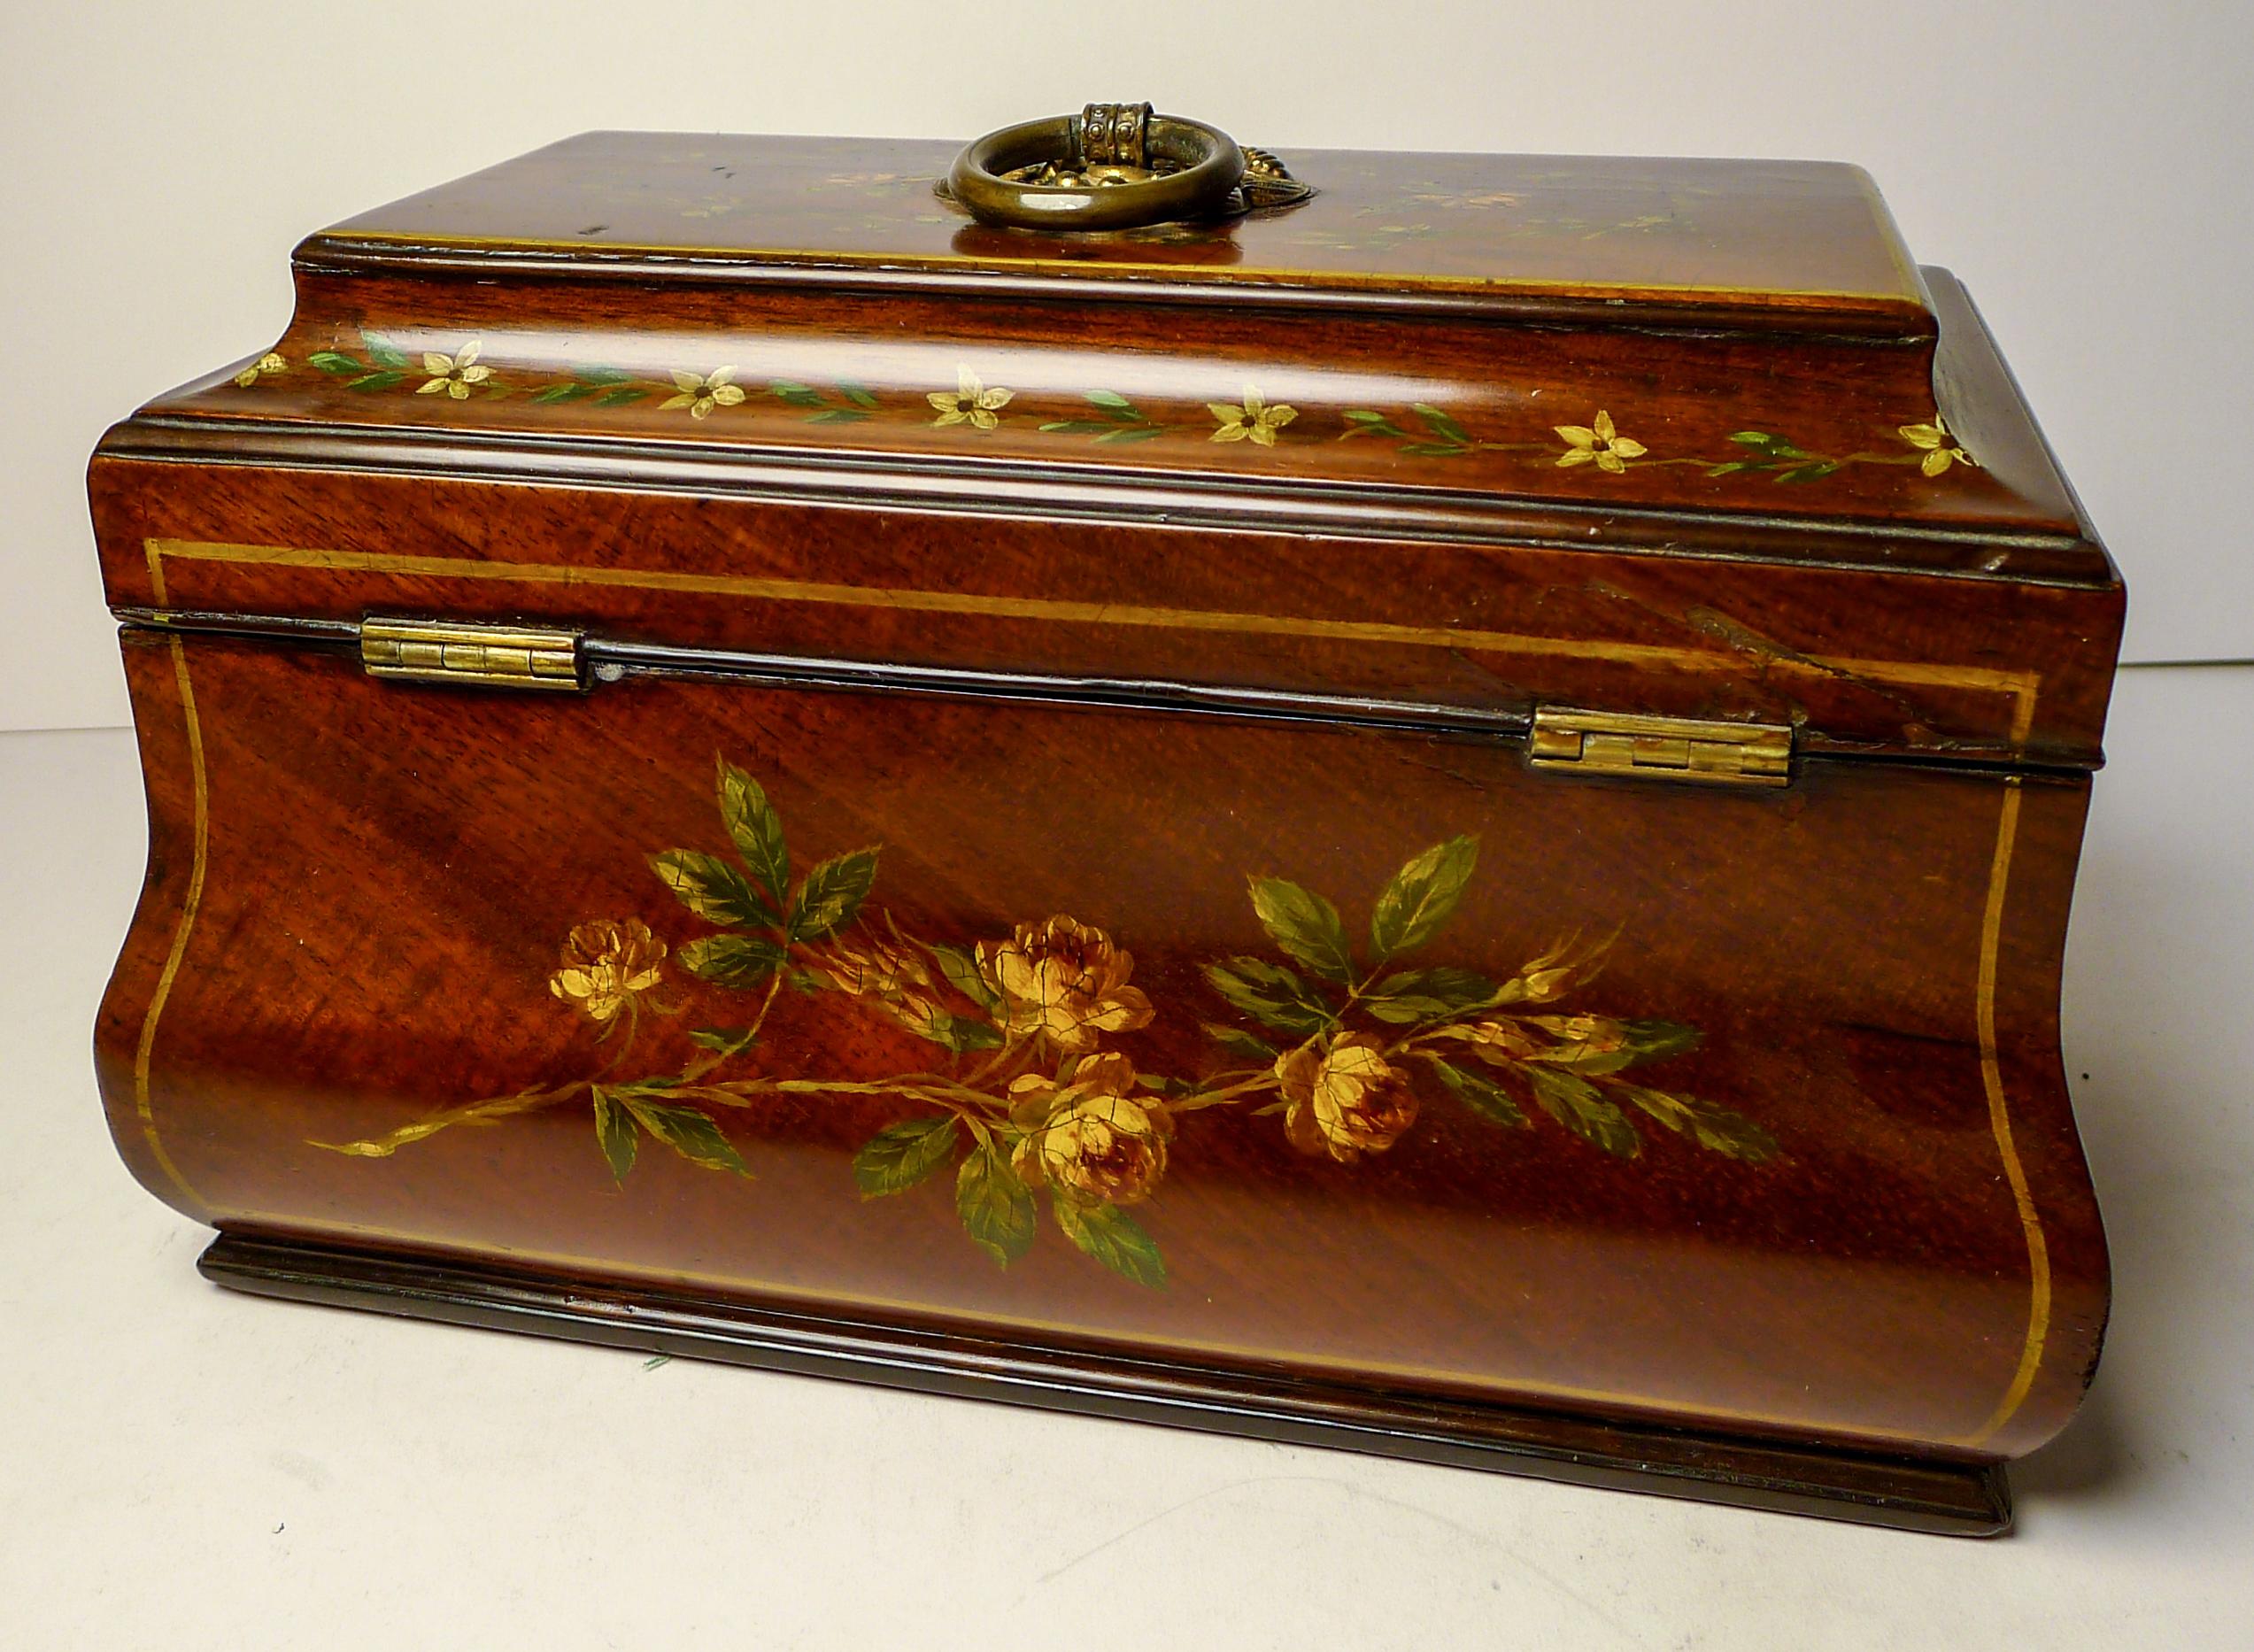 Early 19th Century English Hand-Painted Regency Mahogany Tea Caddy c.1820 For Sale